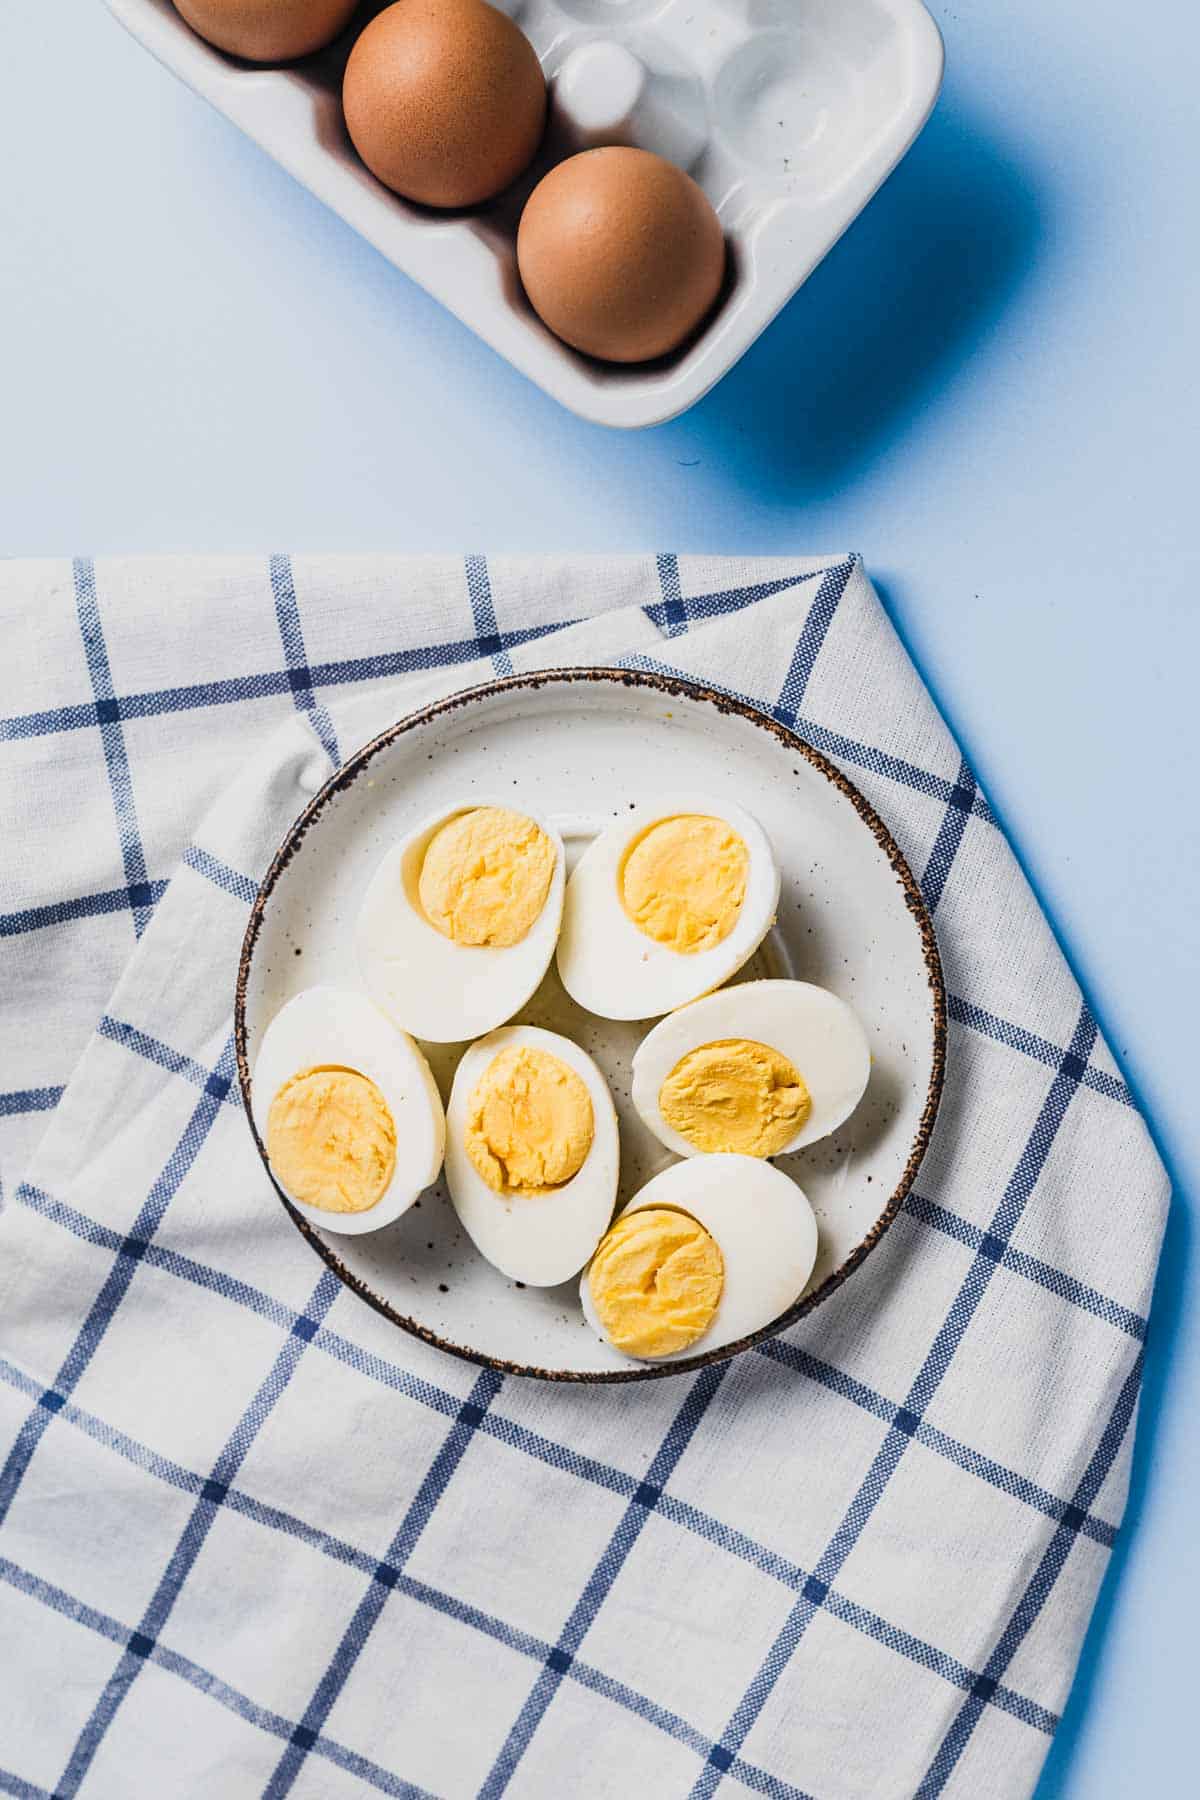 Birds eye view of 3 hard boiled eggs cut in half on a white plate.